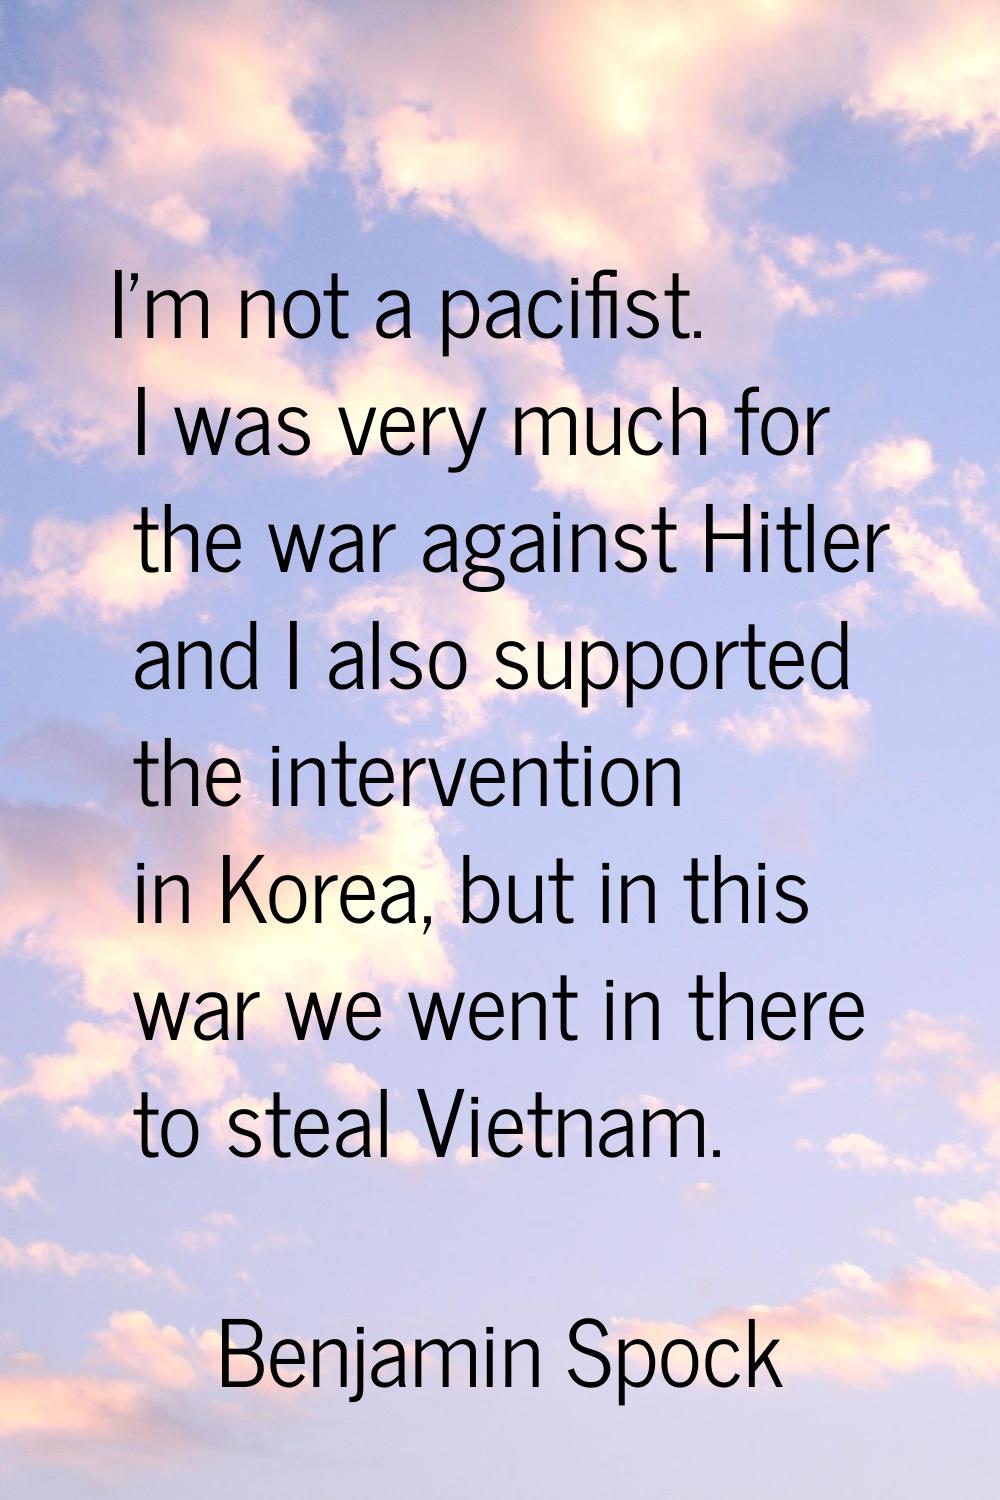 I'm not a pacifist. I was very much for the war against Hitler and I also supported the interventio